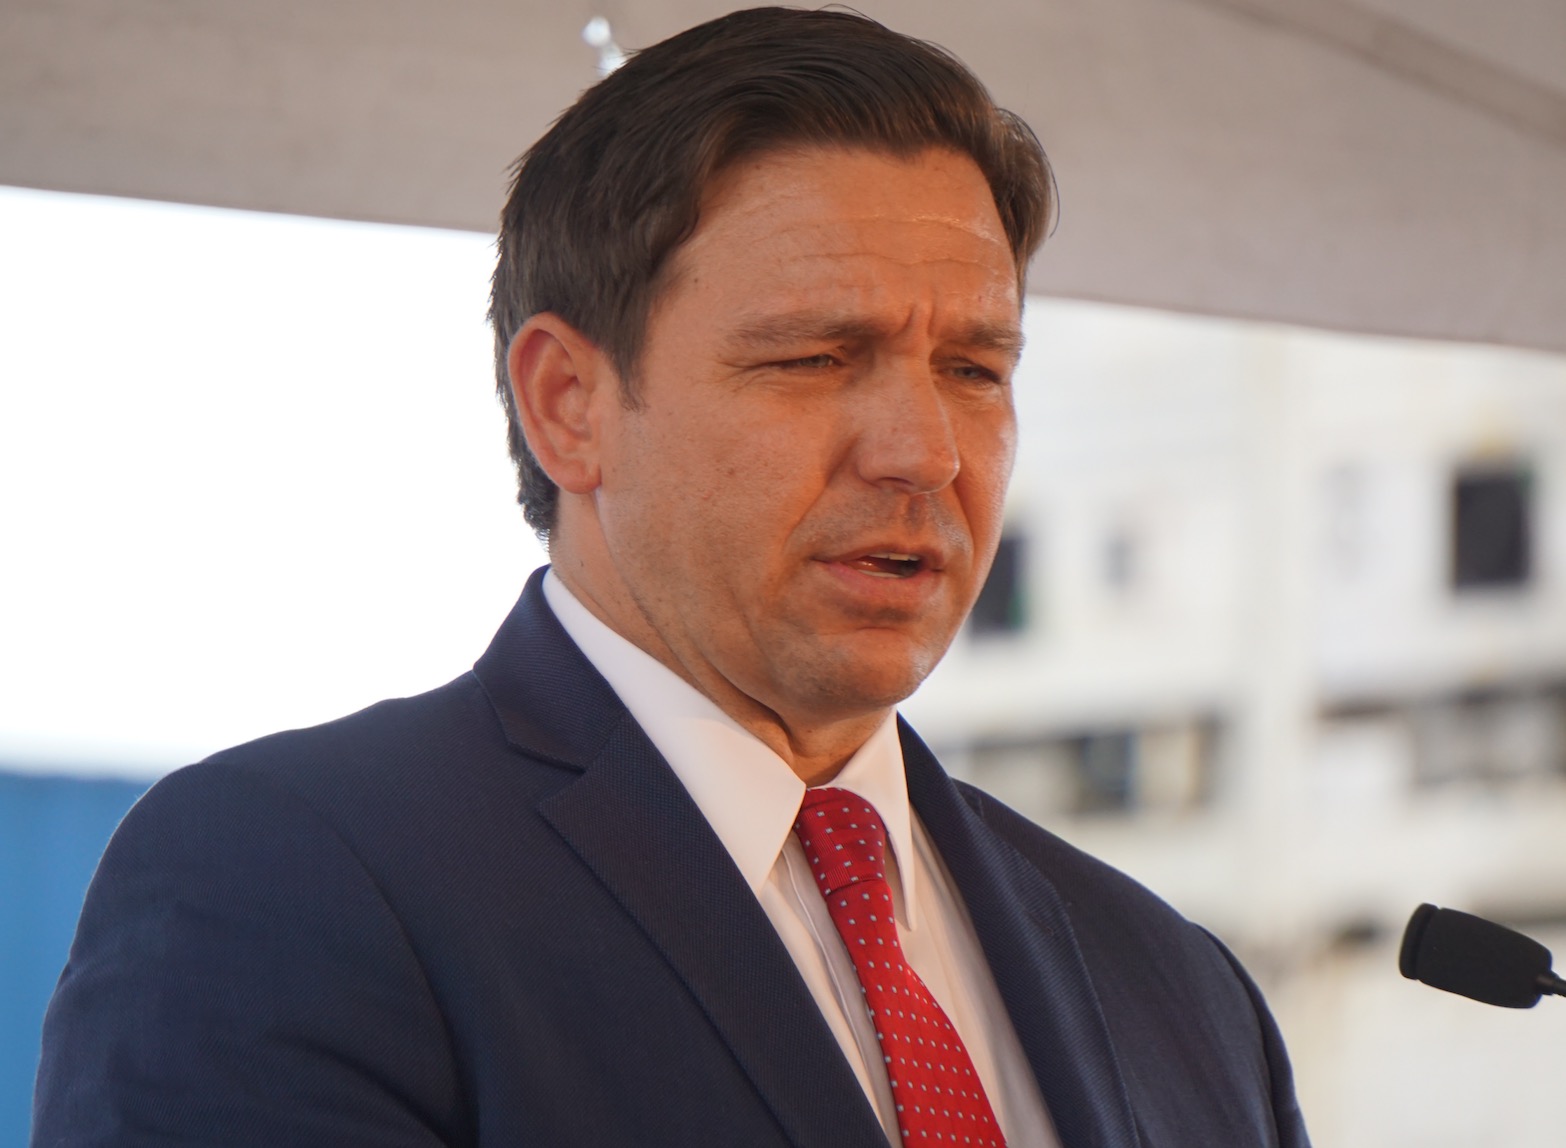 DeSantis Accused of Playing 'Political Games' Over Unemployment